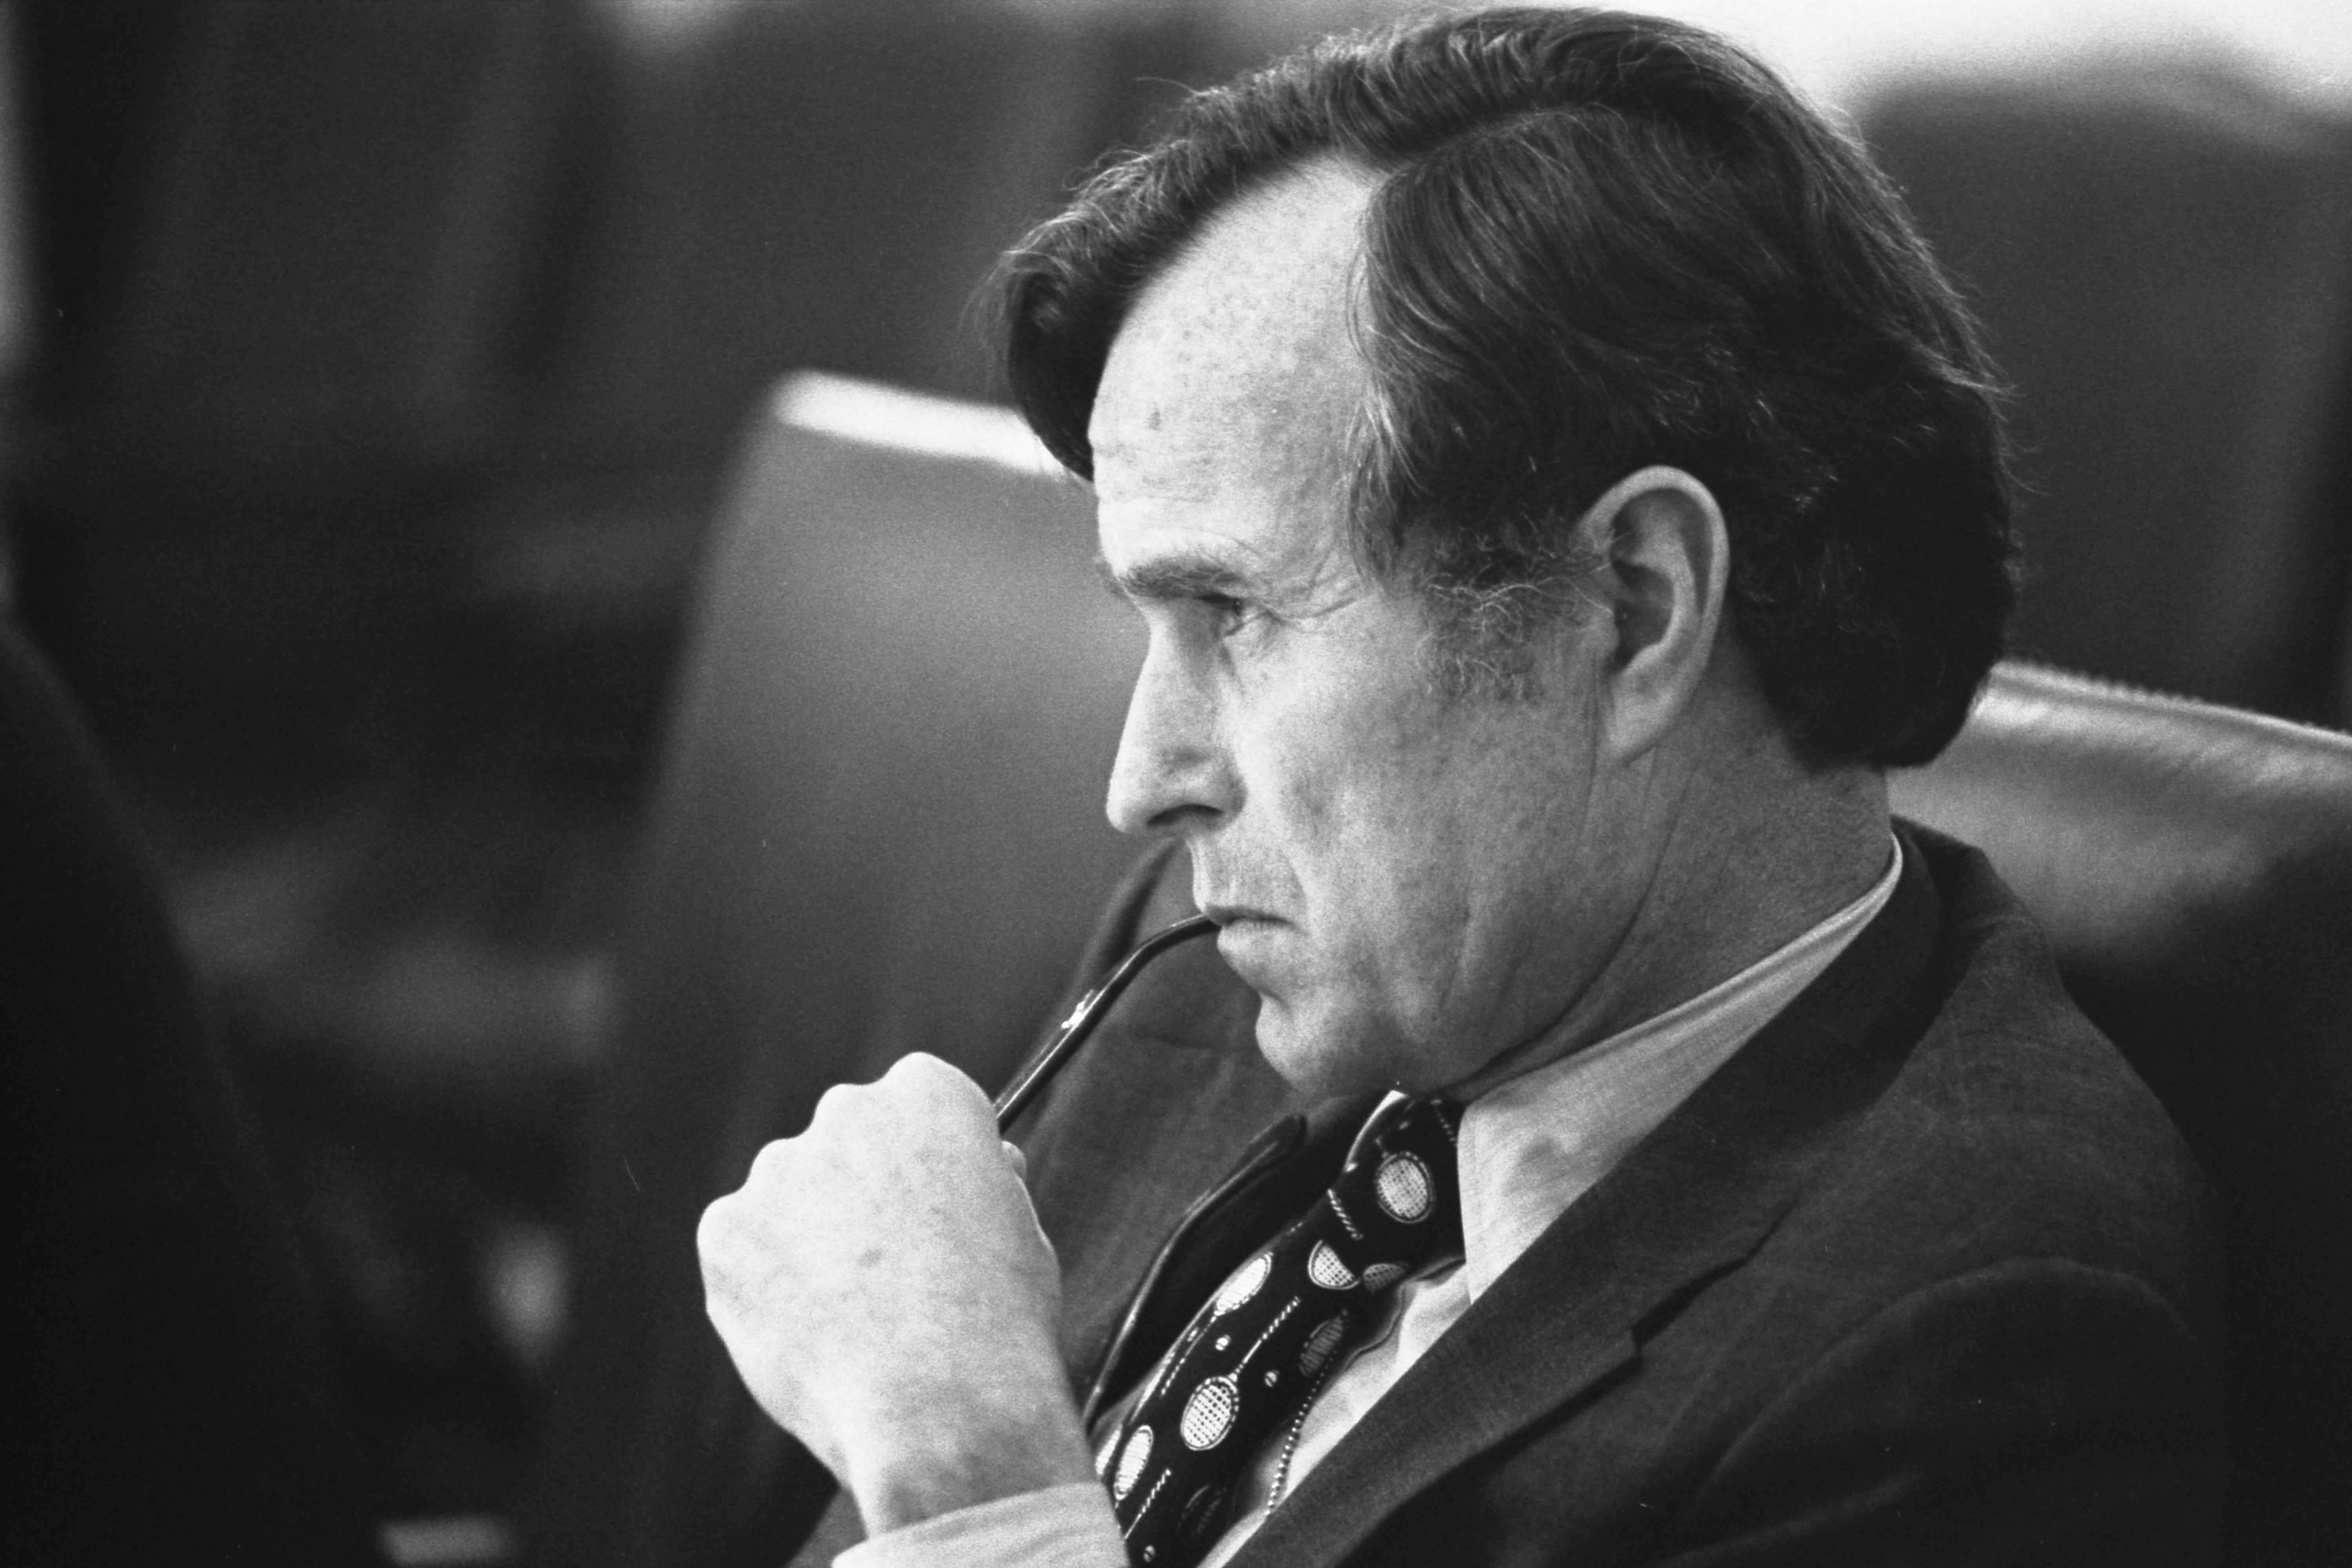 CIA_Director_George_H.W._Bush_listens_at_a_meeting_following_the_assassinations_in_Beirut,_1976_-_NARA_-_7064954.jpg